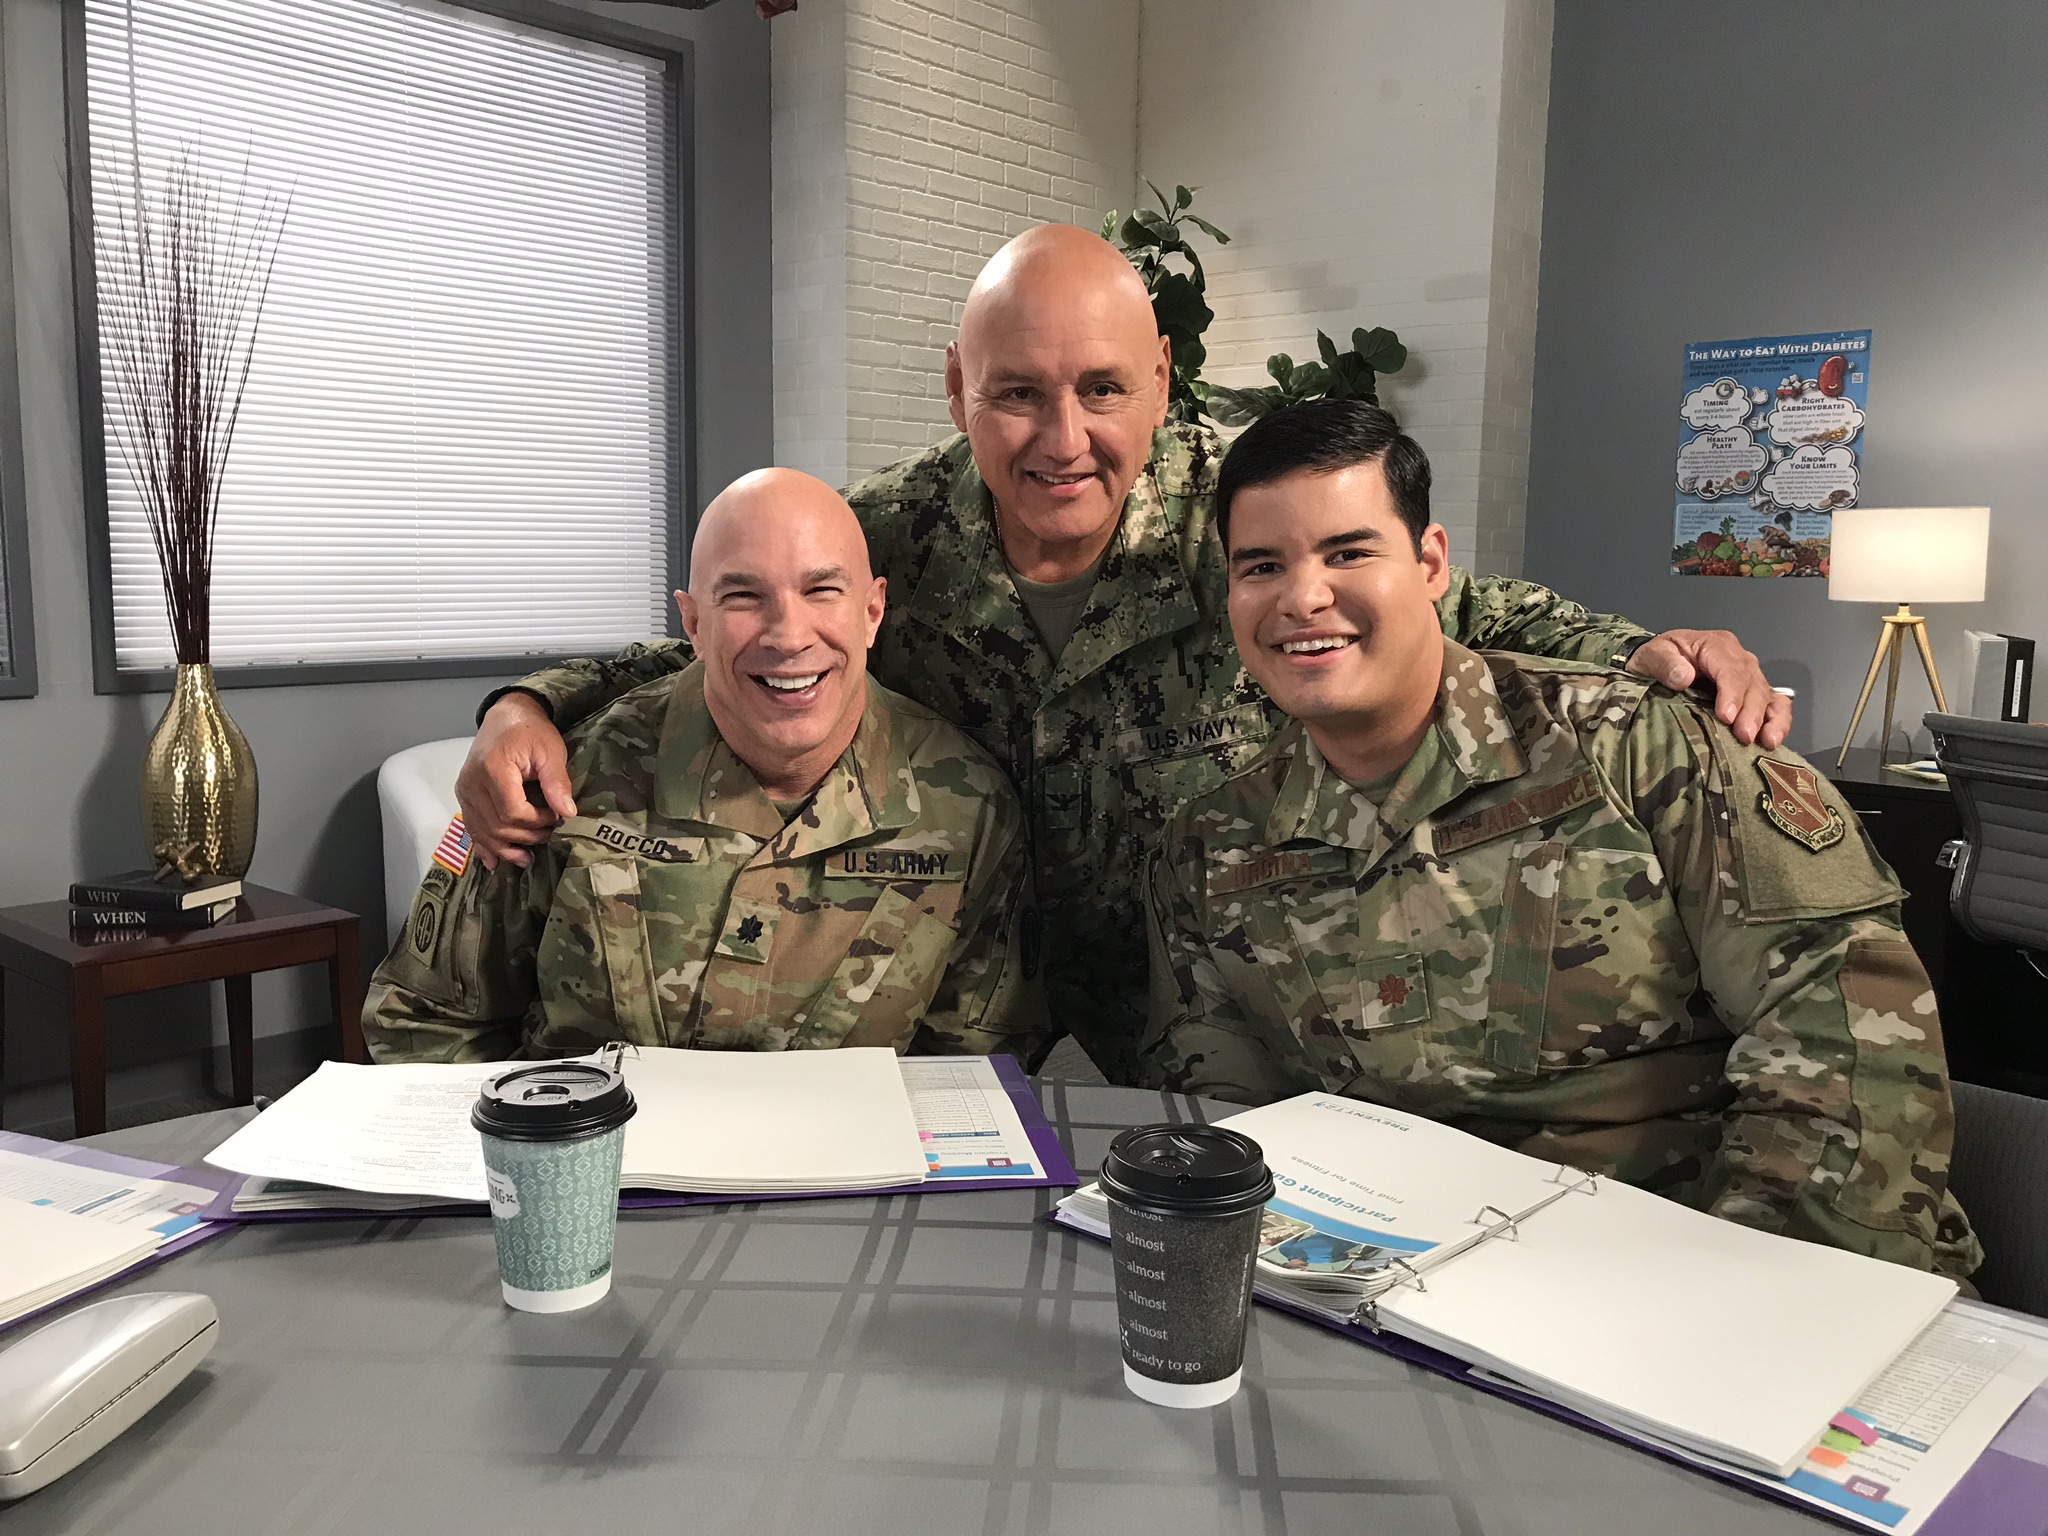 Three men in military fatigues smile for the camera.